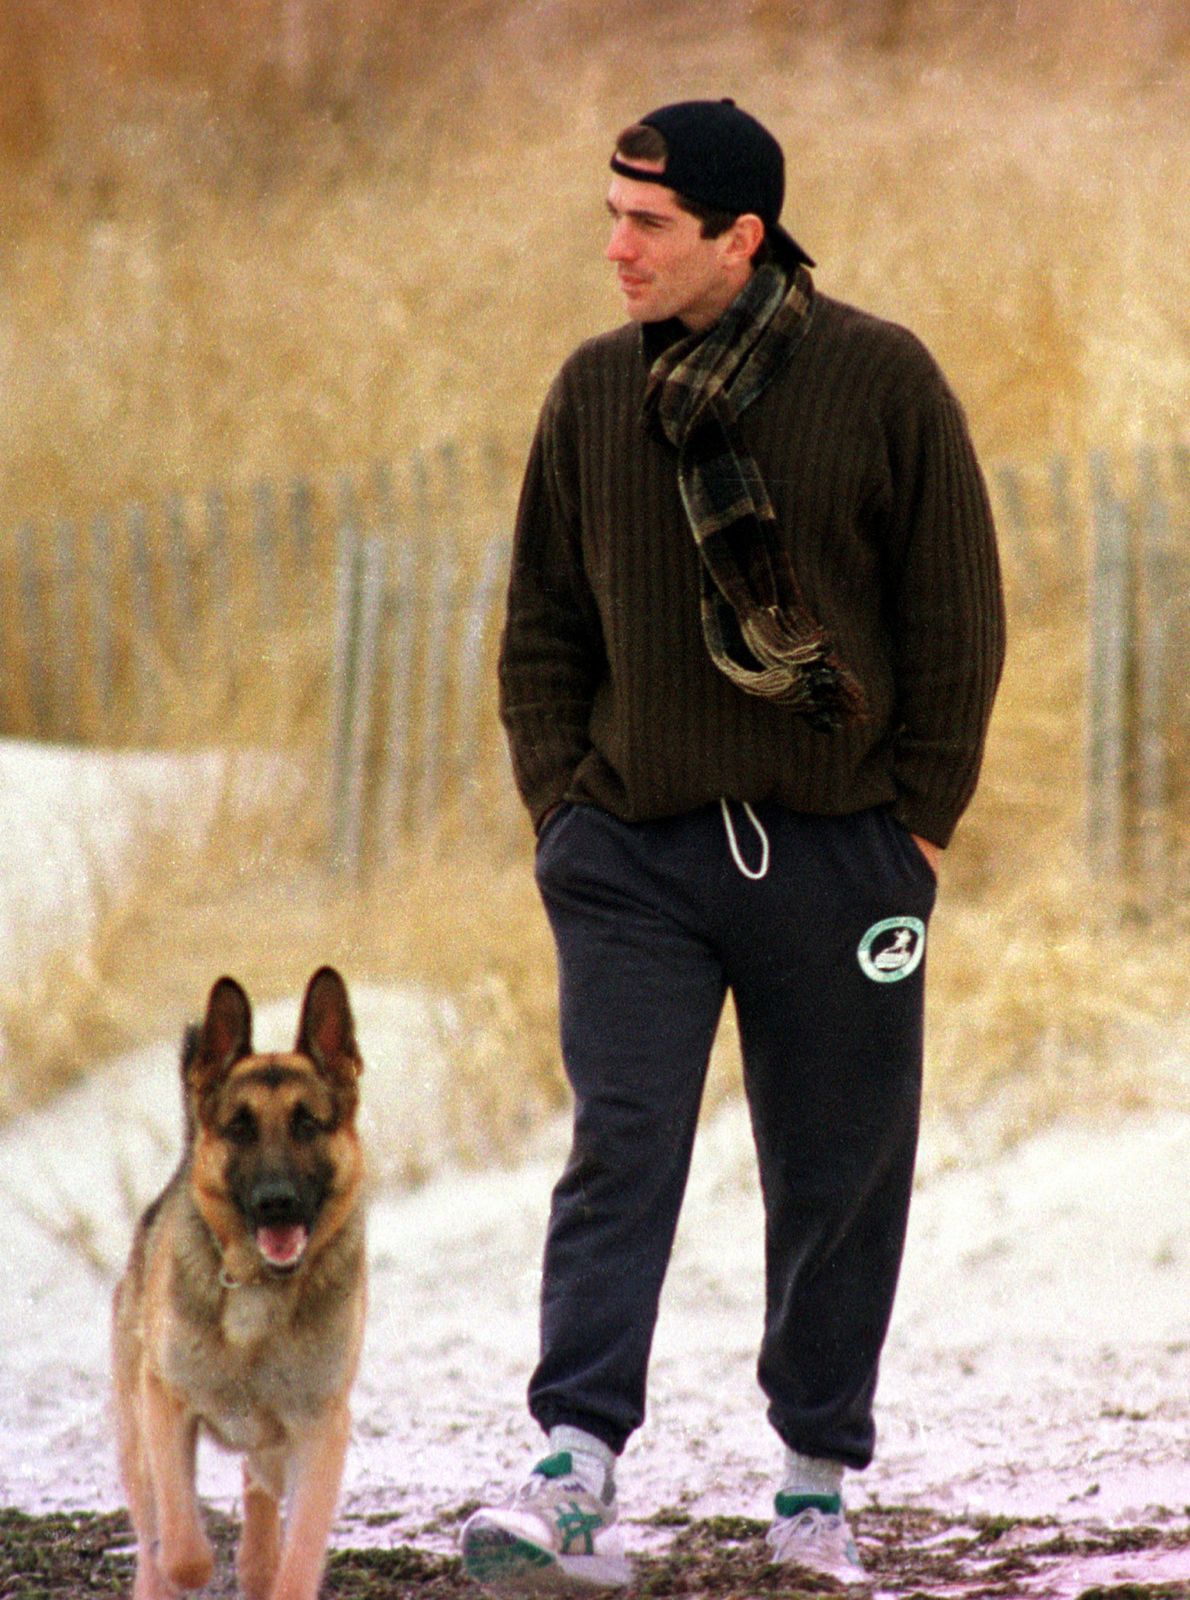 John F. Kennedy Jr. (1960 - 1999) looked out to sea while walking with his dog along the beach in Hyannis Port, Massachusetts on January 24, 1995 | Photo: Getty Images